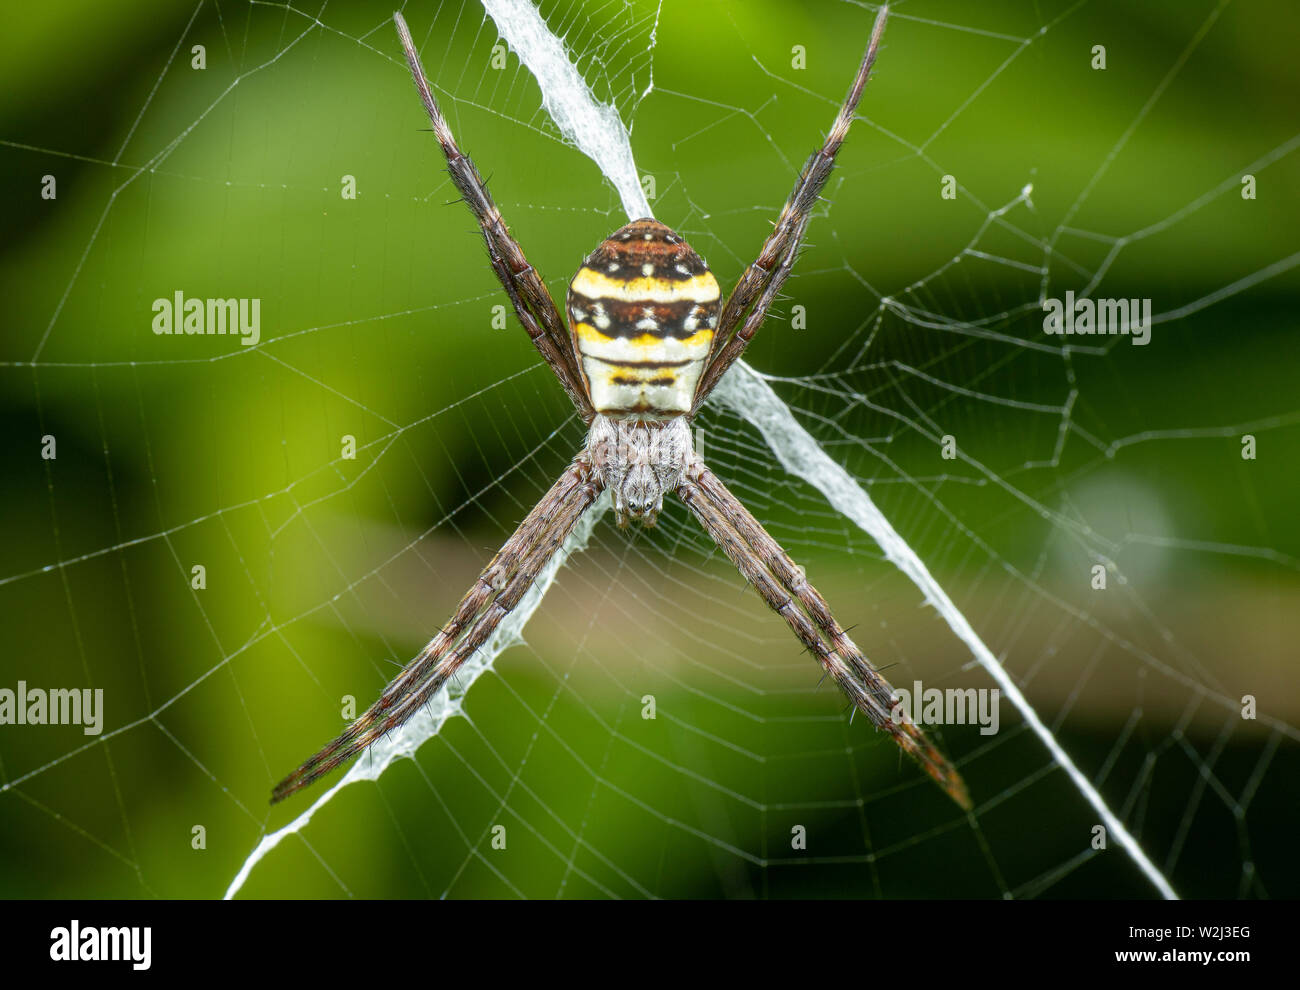 Argiope keyserlingi, the St Andrew's Cross spider, sitting on her web with stabilimentum Stock Photo